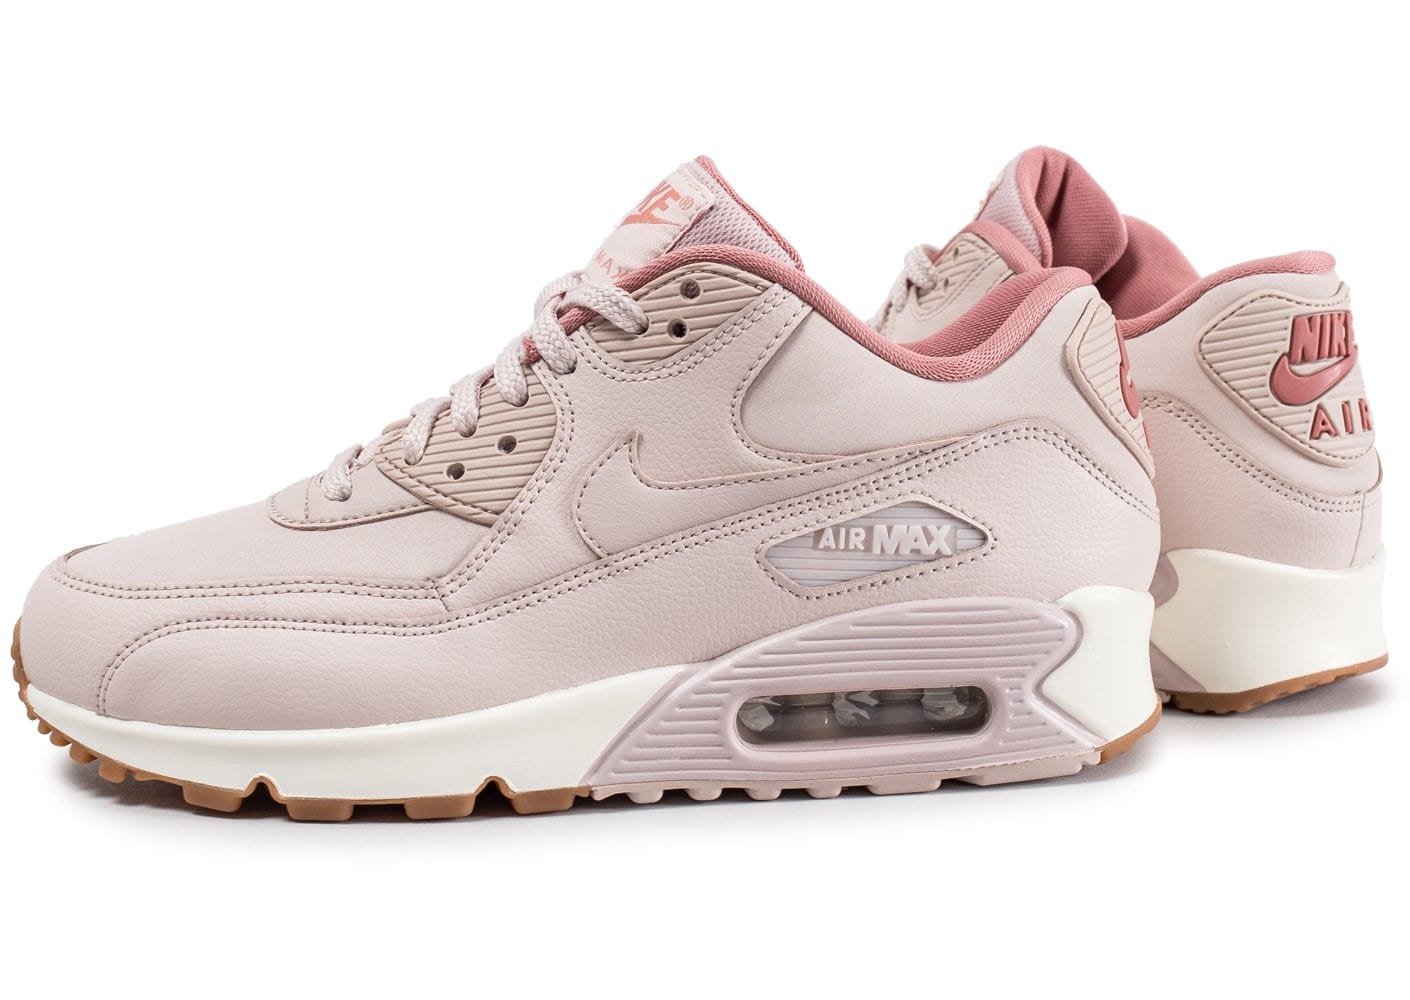 nike air max 90 w chaussures, Cliquez pour zoomer Chaussures Nike Air Max 90 W Leather rose vue extérieure ...